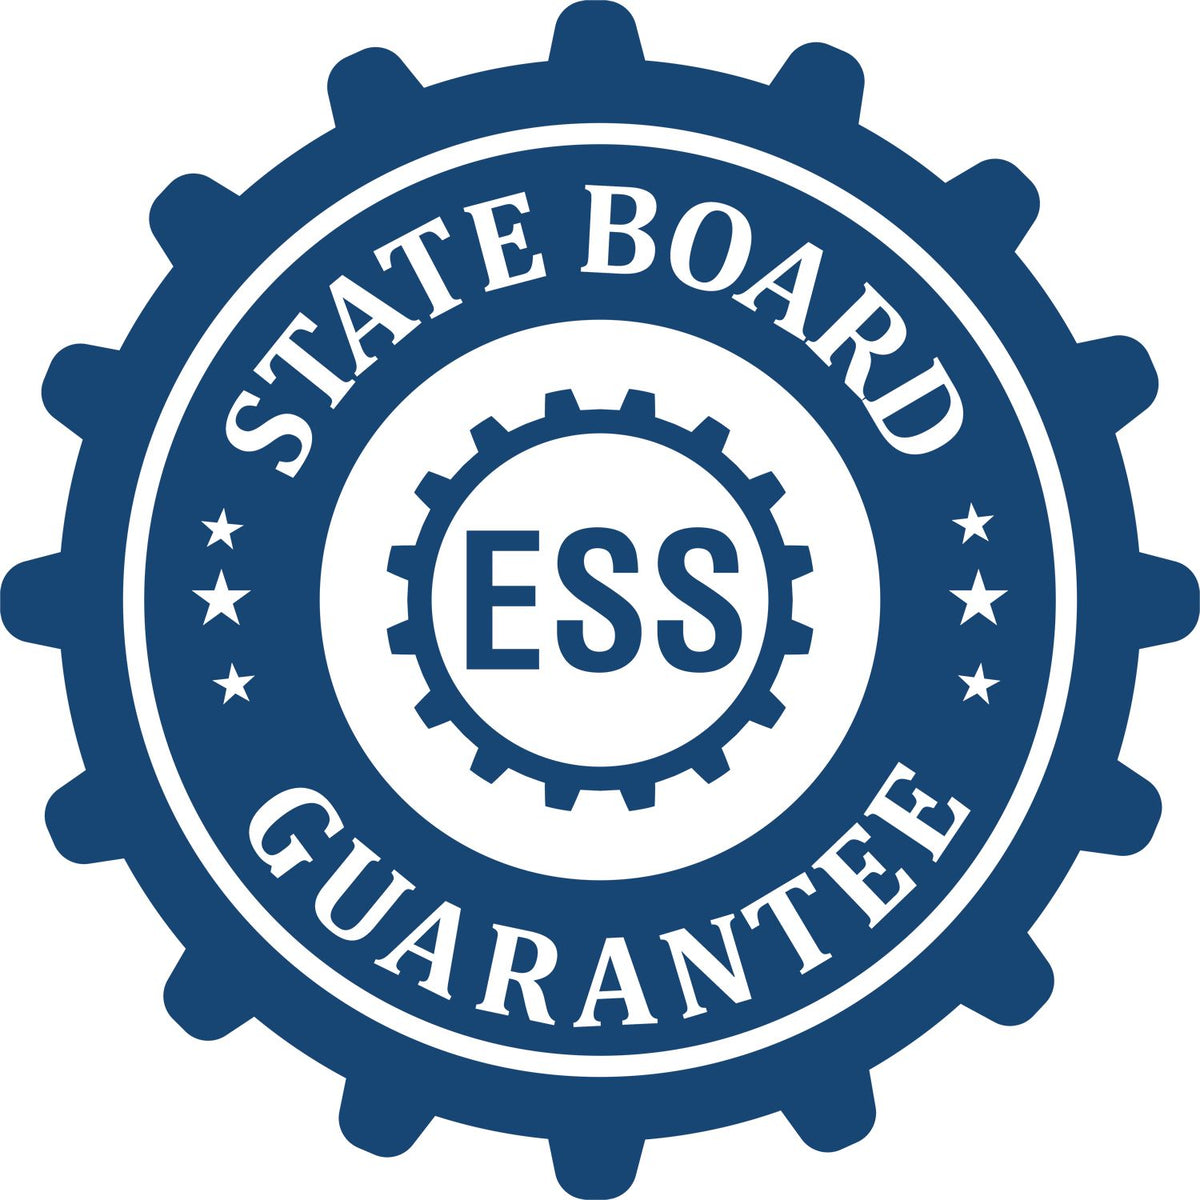 An emblem in a gear shape illustrating a state board guarantee for the Hybrid Arkansas Geologist Seal